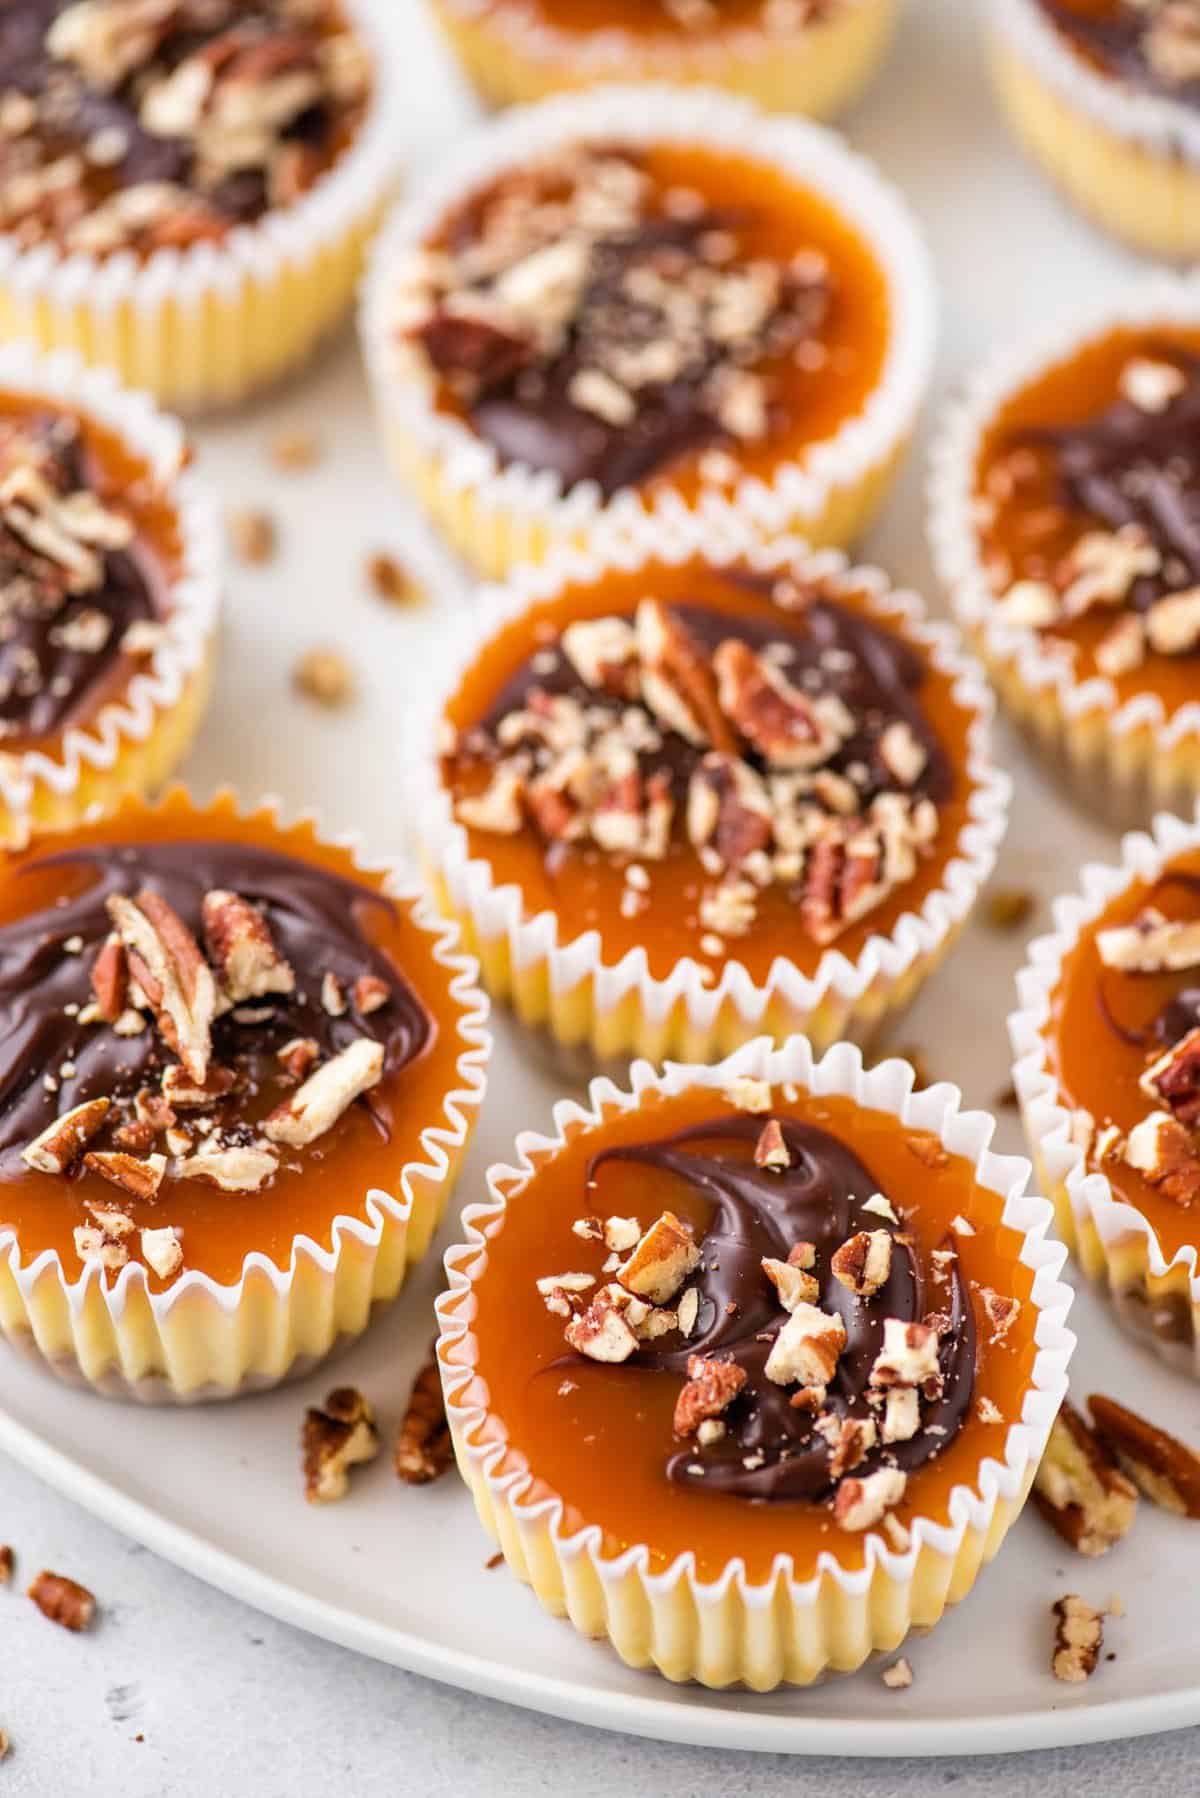 mini turtle cheesecakes topped with caramel, chocolate and chopped pecans arranged on white tray